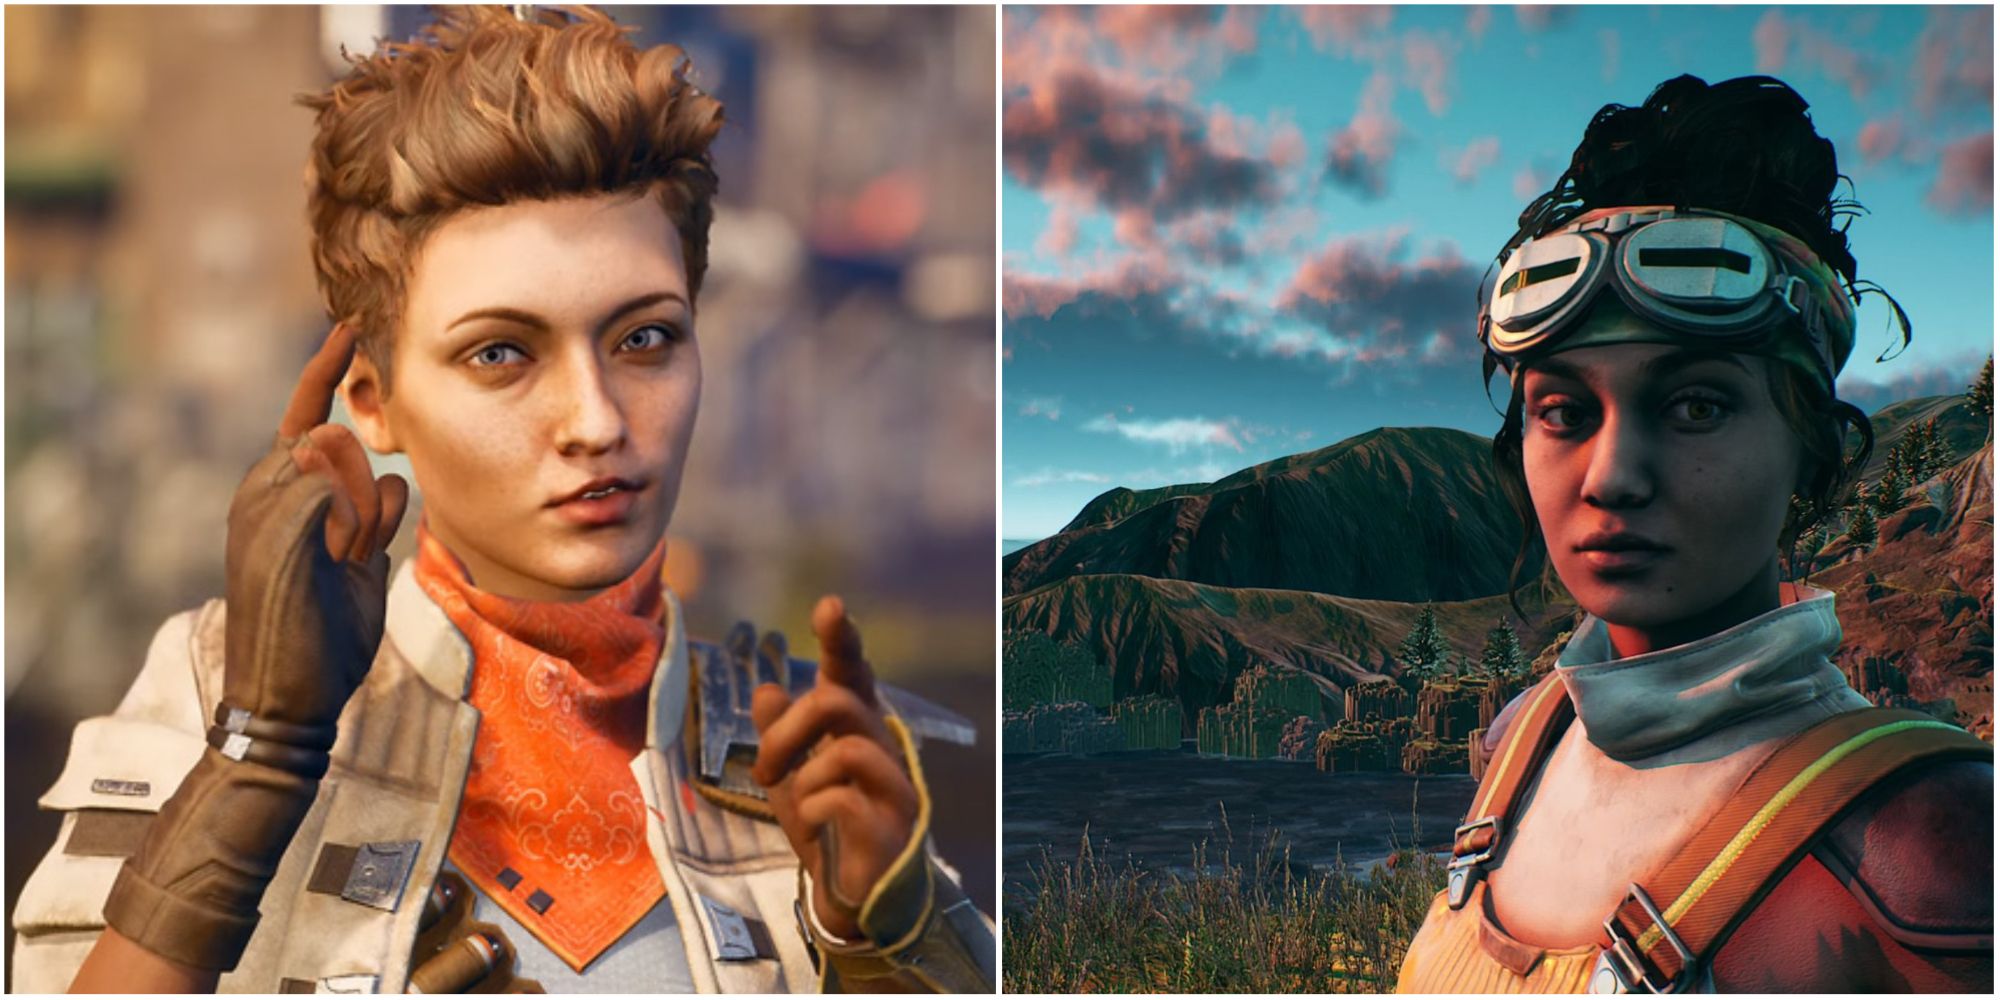 The Outer Worlds - Ellie giving finger guns and Parvarti looking at the camera